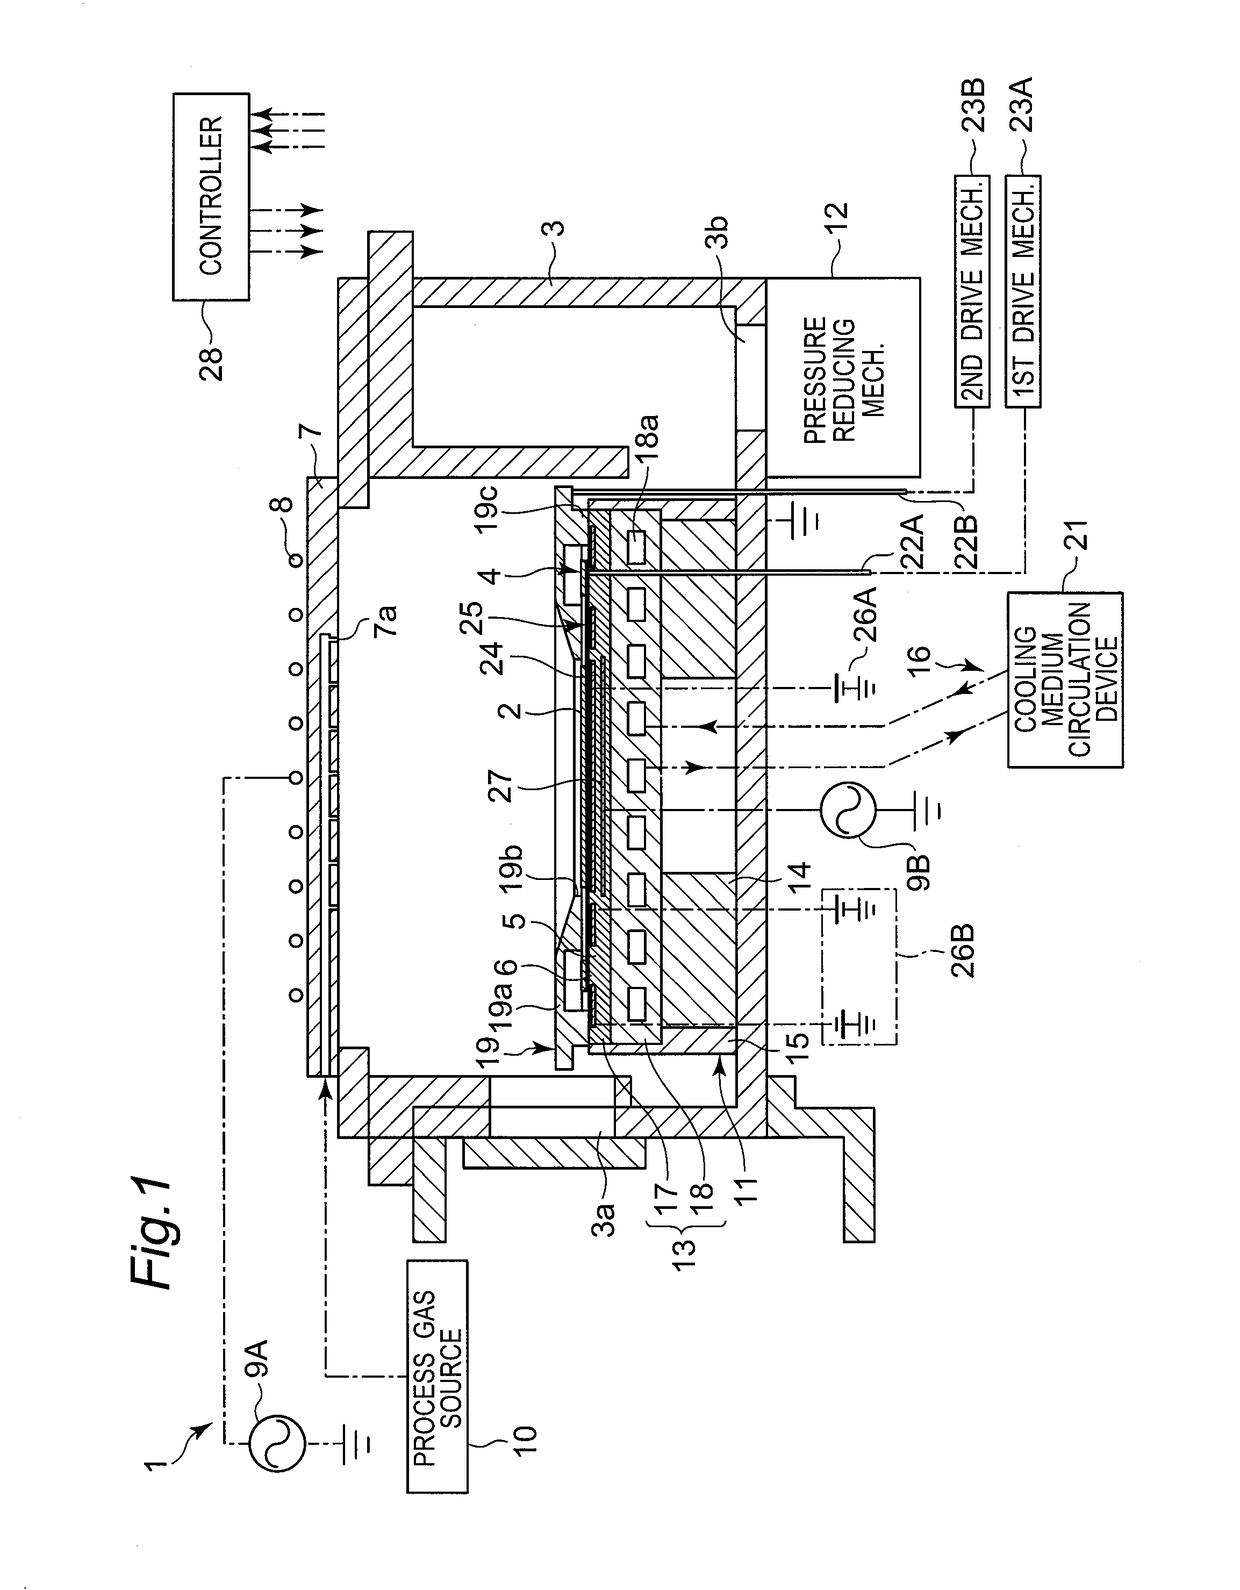 Plasma processing apparatus and method therefor